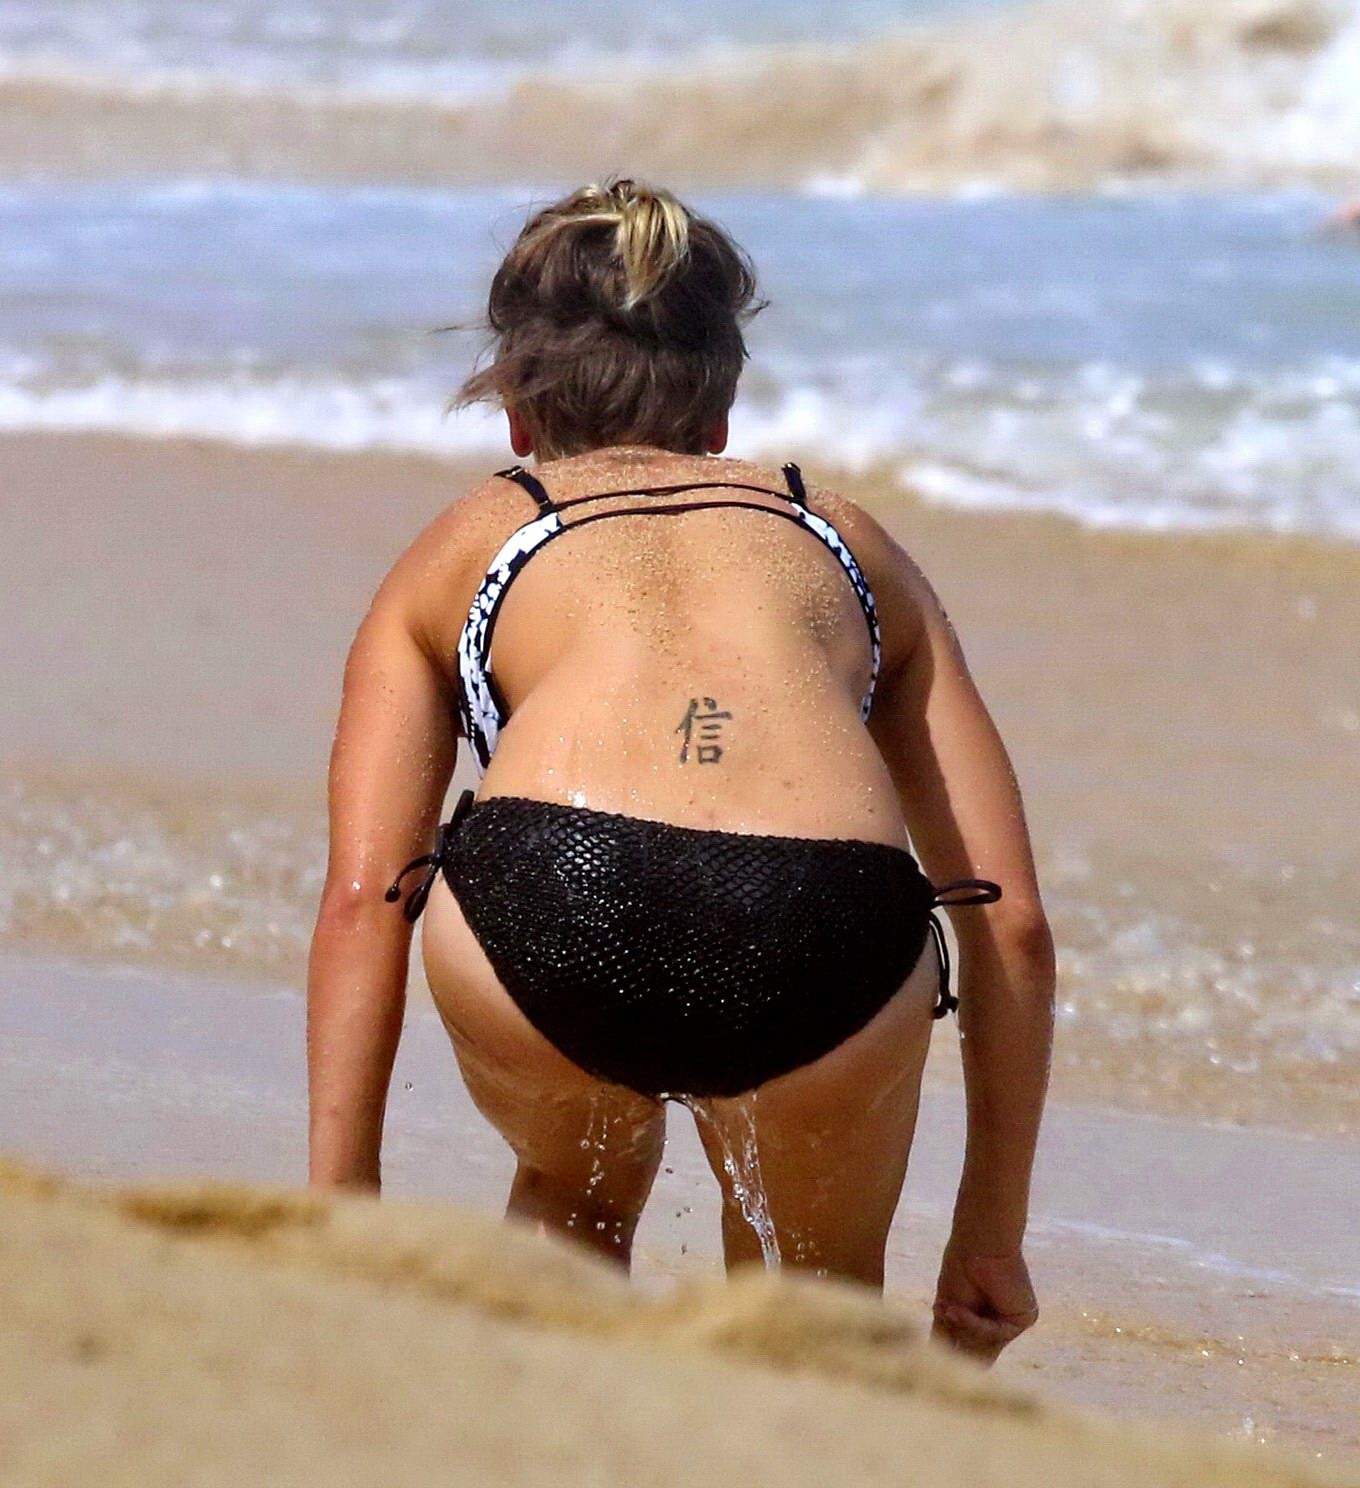 Kaley Cuoco Shows Off Her Ass Wearing A Monochrome Bikini On A Beach In Mexico